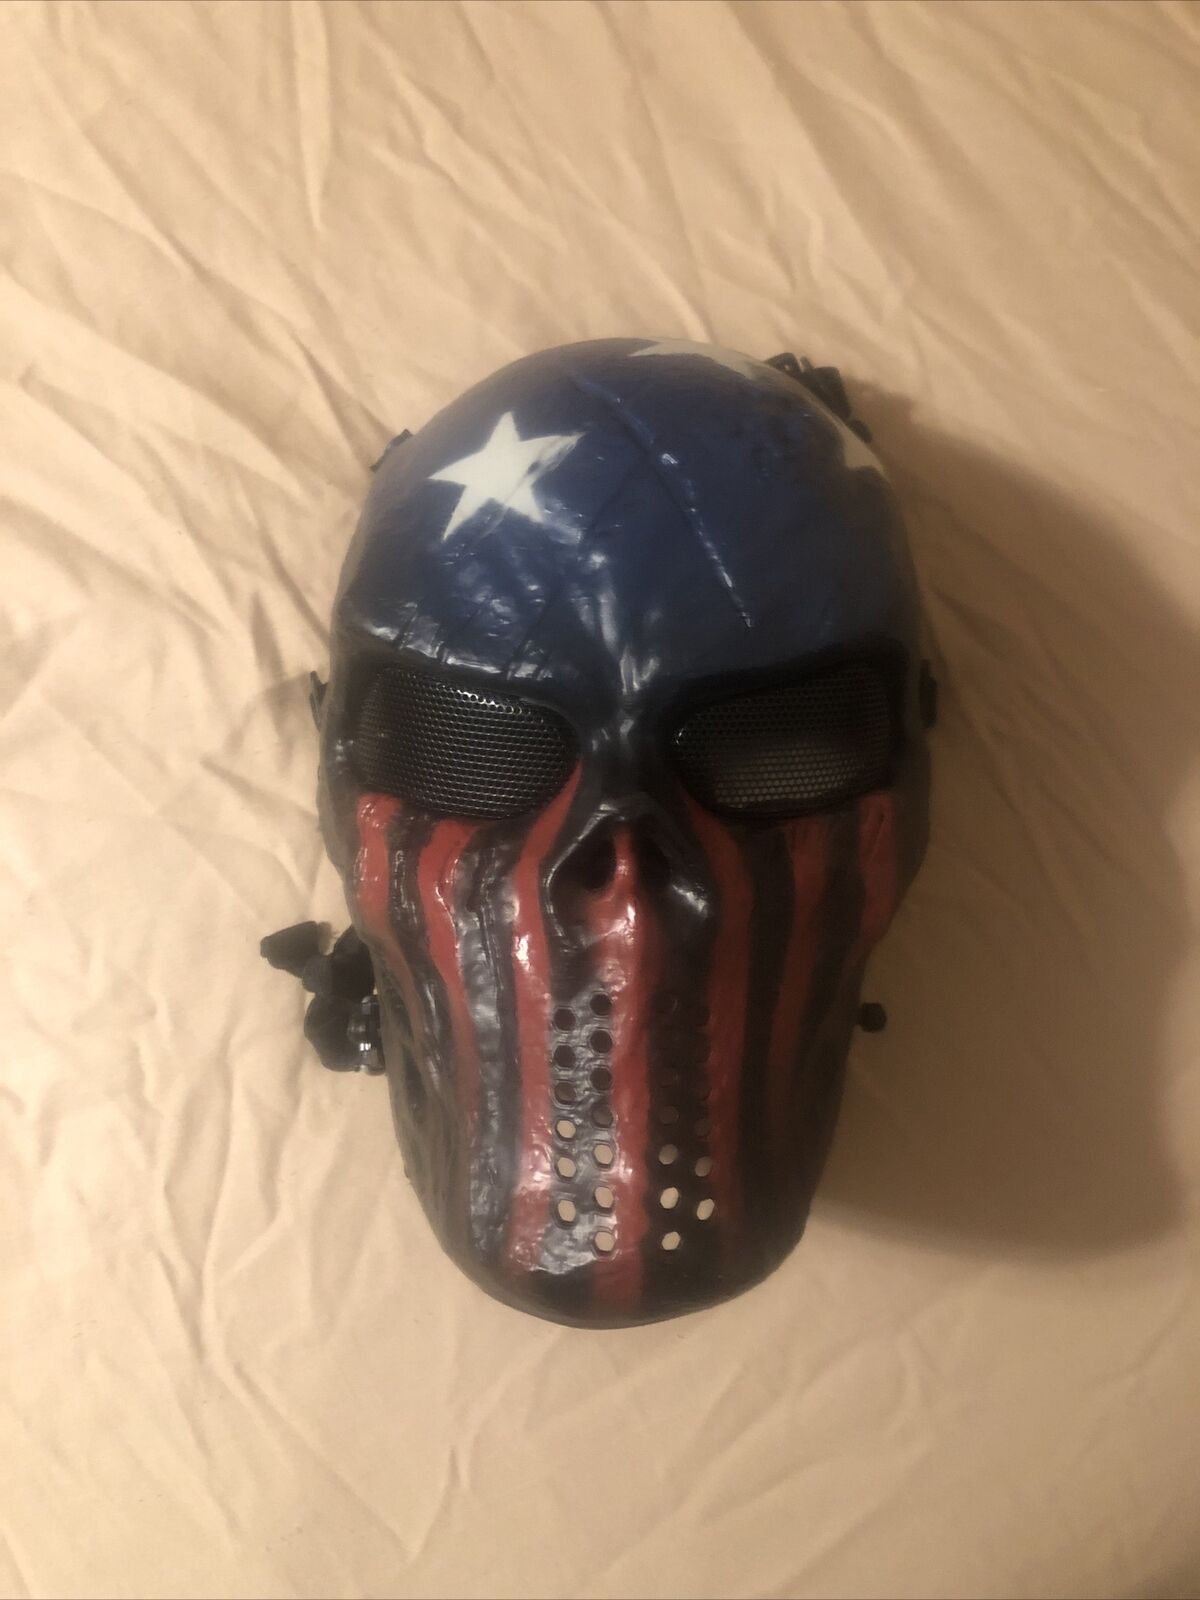 Super beauty product Max 42% OFF restock quality top Airsoft Paintball Full Face American Tactical Mask Skull Mi Flag